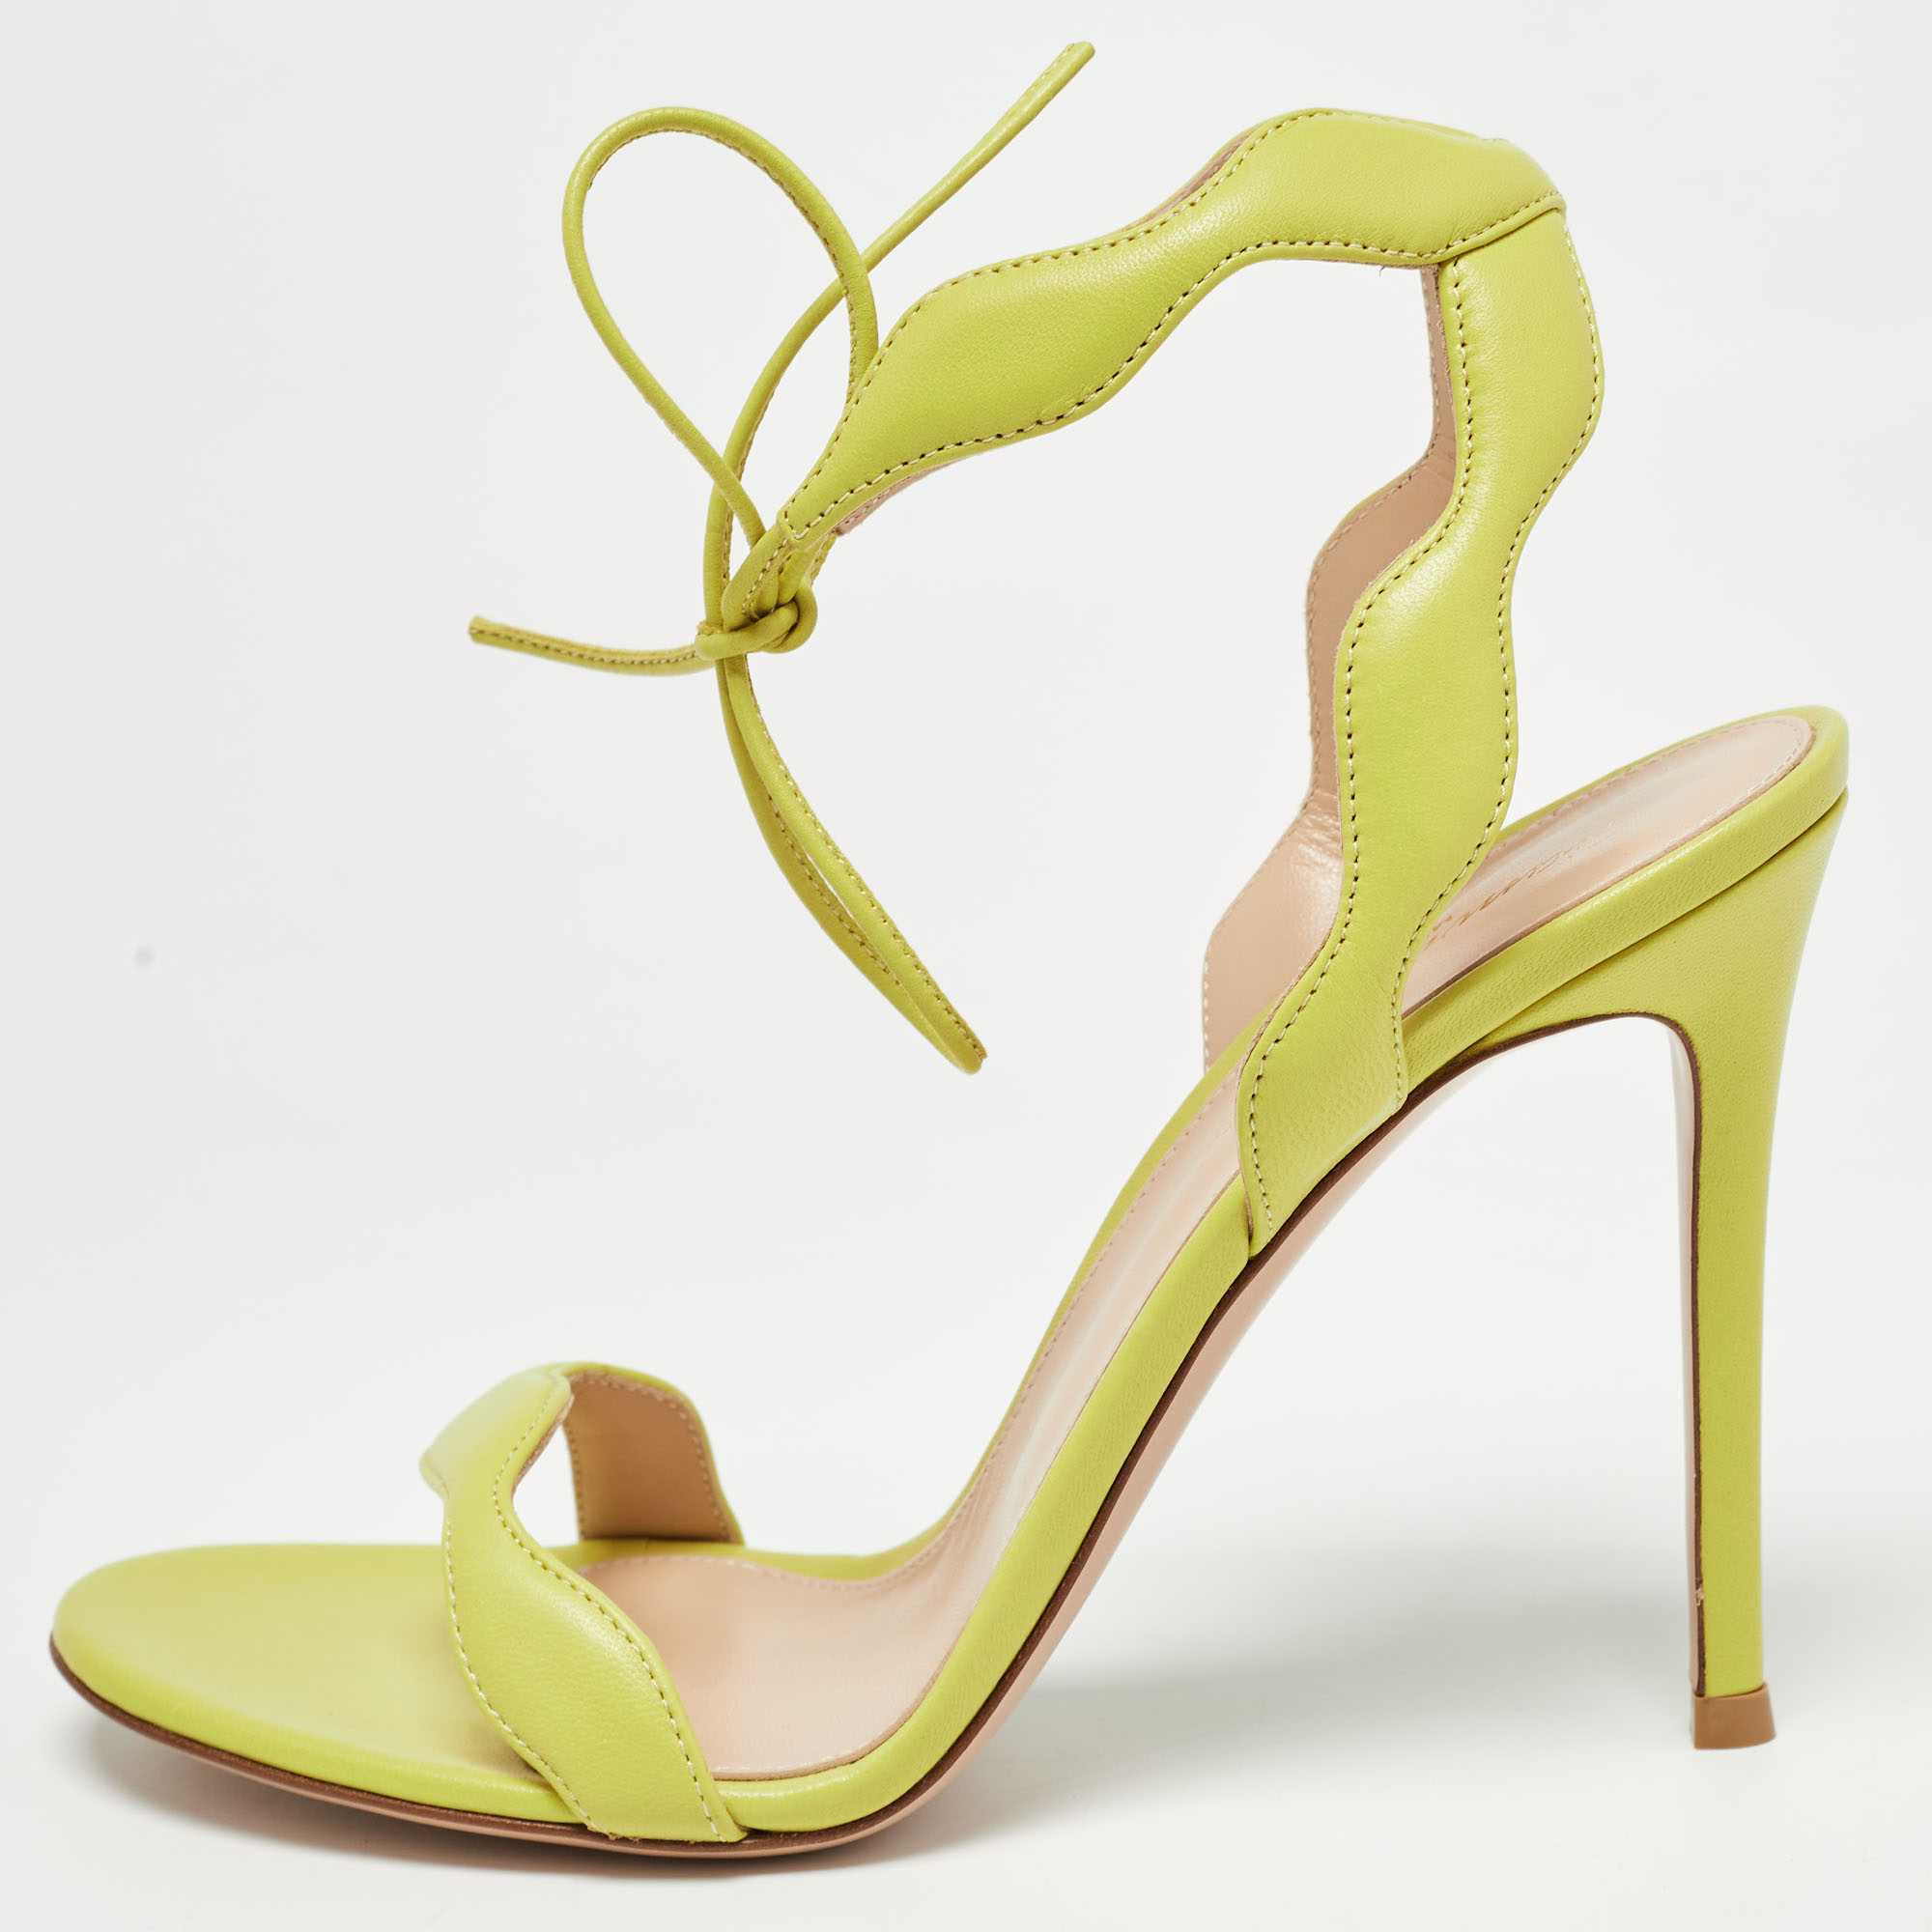 Gianvito Rossi Green Leather Wavy Ankle Tie Sandals Size 38